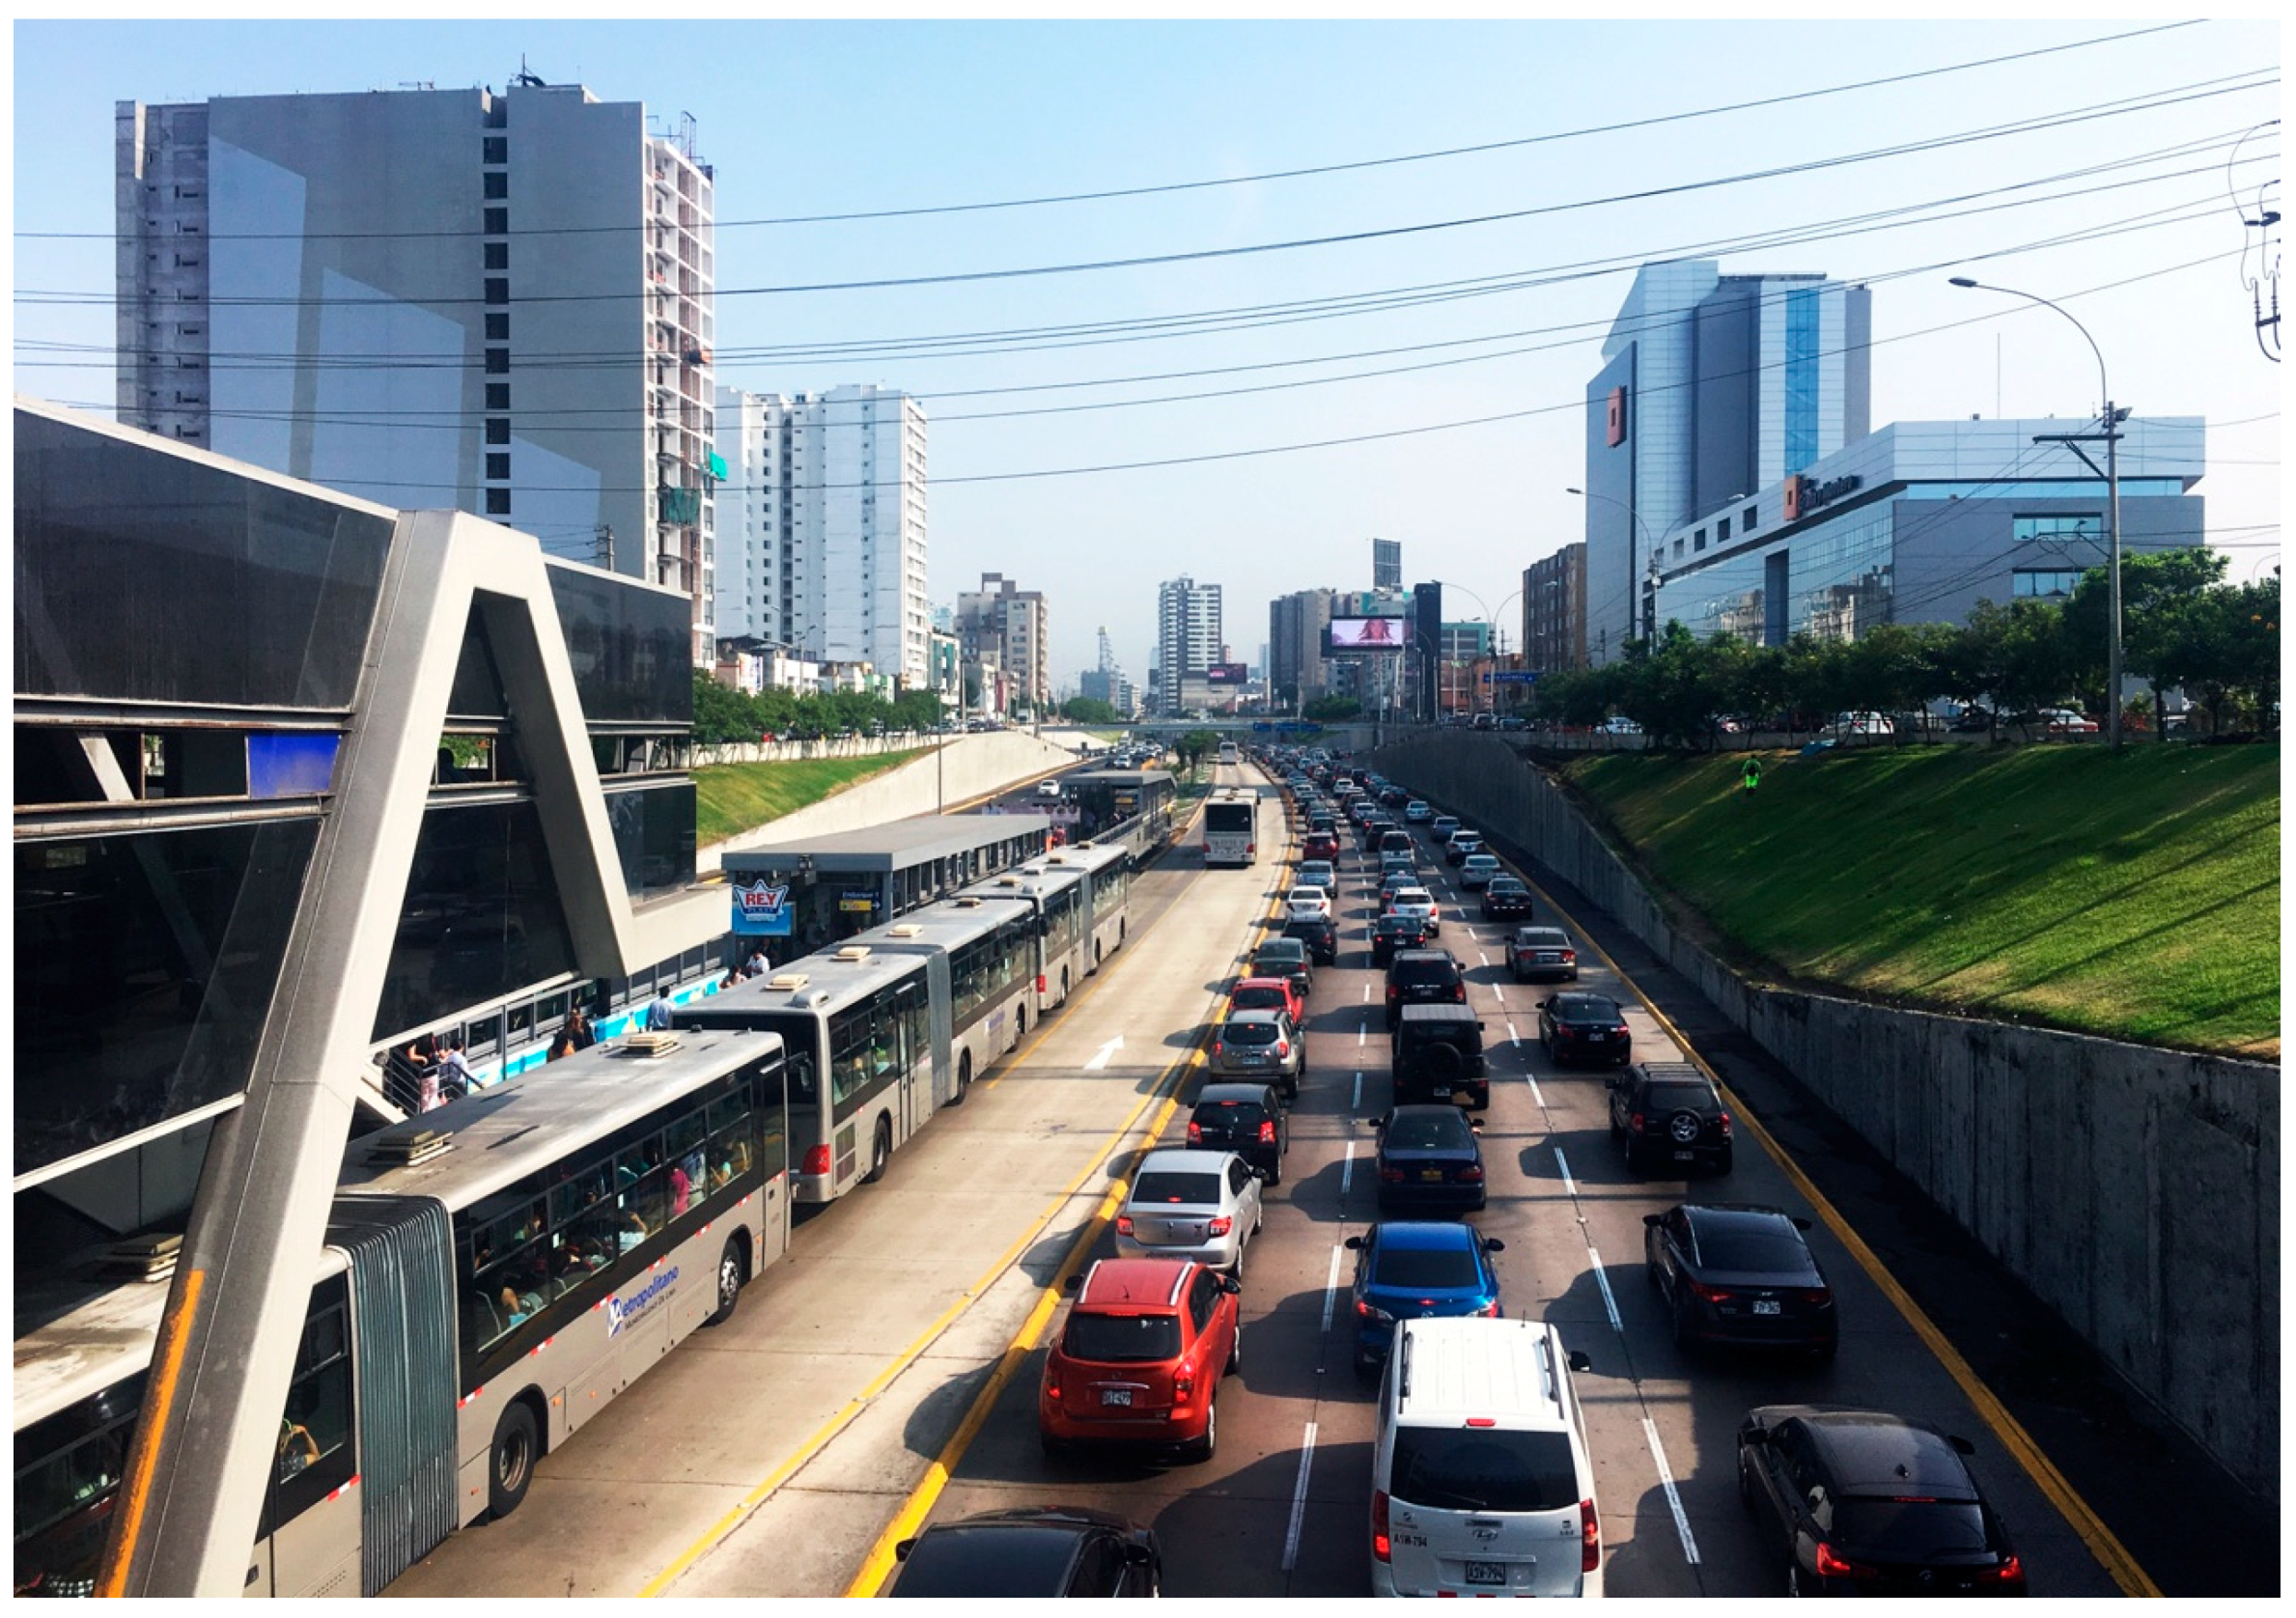 Urban Science | Free Full-Text | Anatomy of an Informal Transit City:  Mobility Analysis of the Metropolitan Area of Lima | HTML